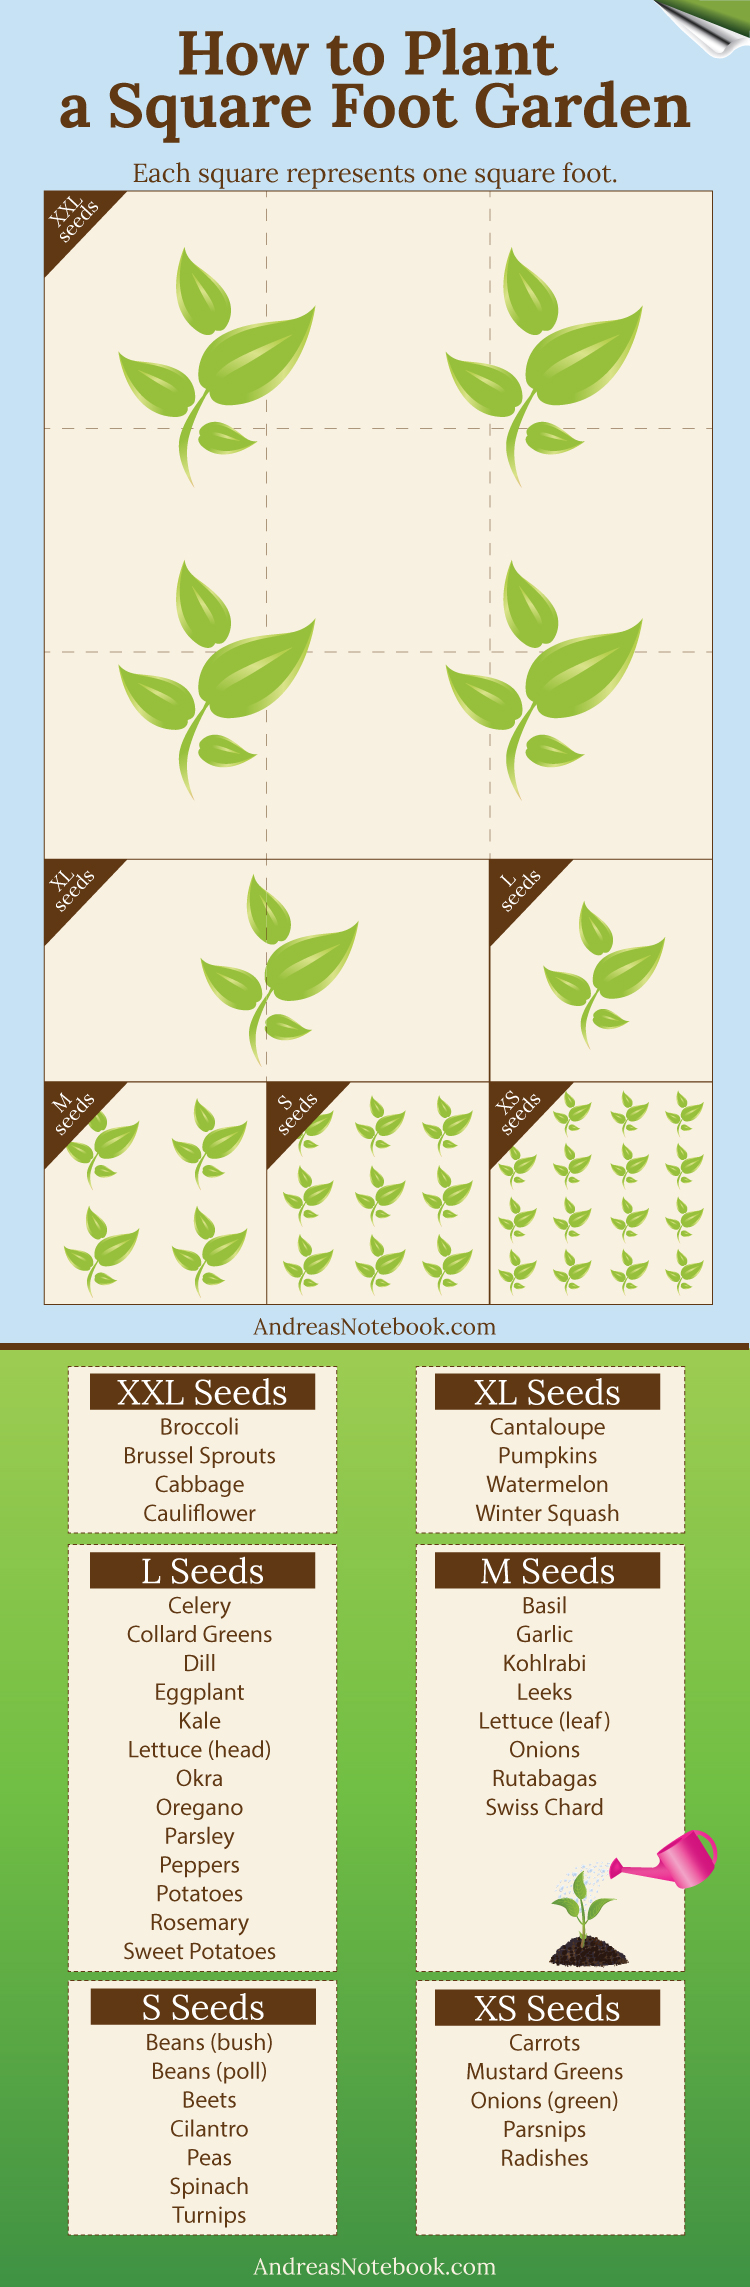 Infographic - How to plant a square foot garden